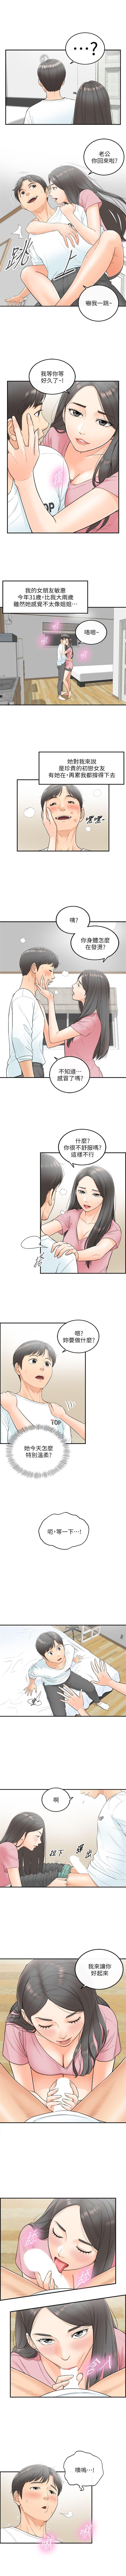 Shecock 正妹小主管 1-48 官方中文（連載中） Step Mom - Page 5